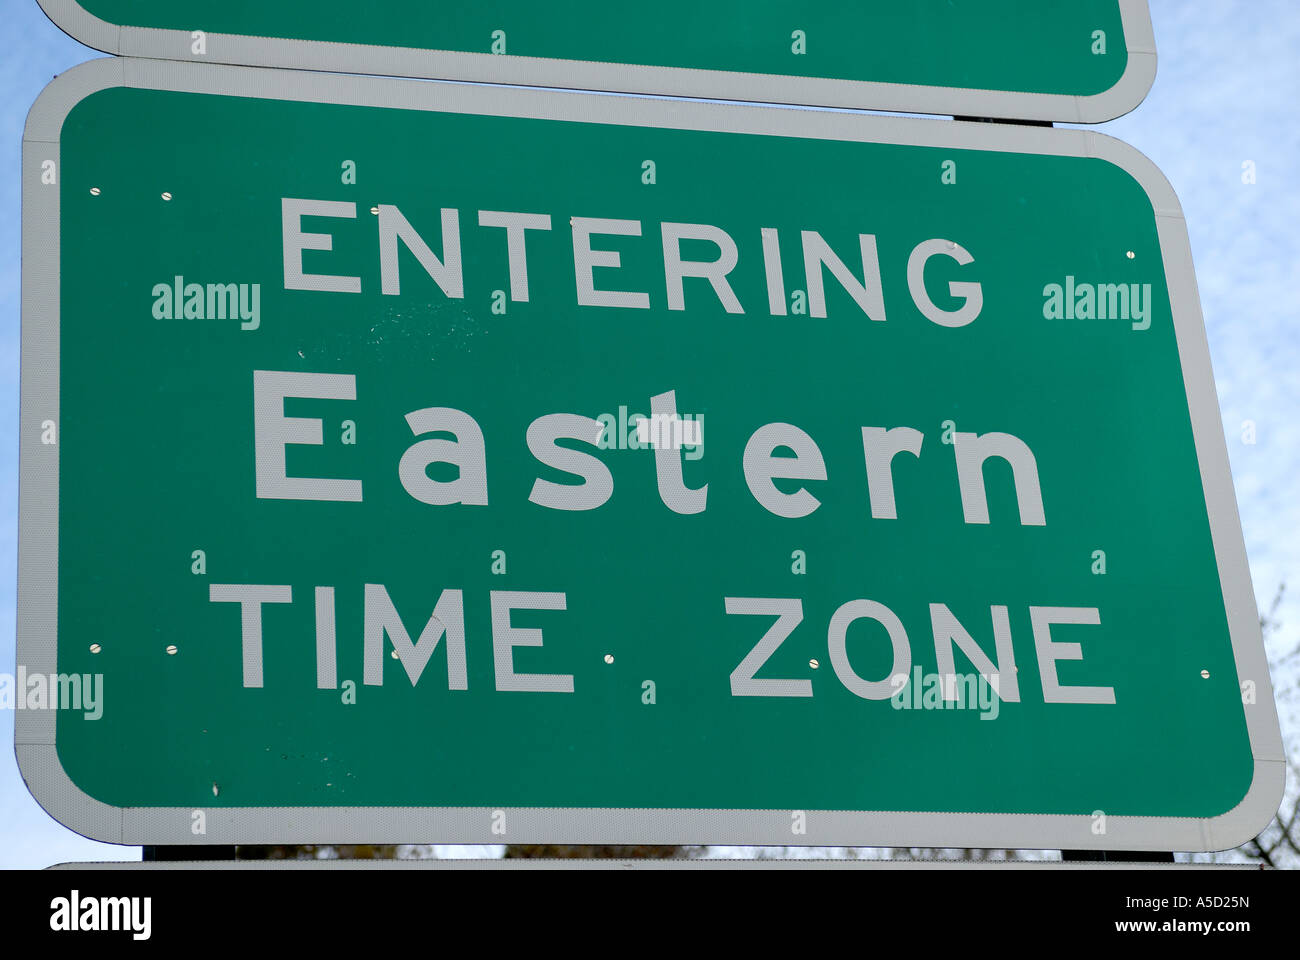 Entering central time zone sign in United States Stock Photo - Alamy